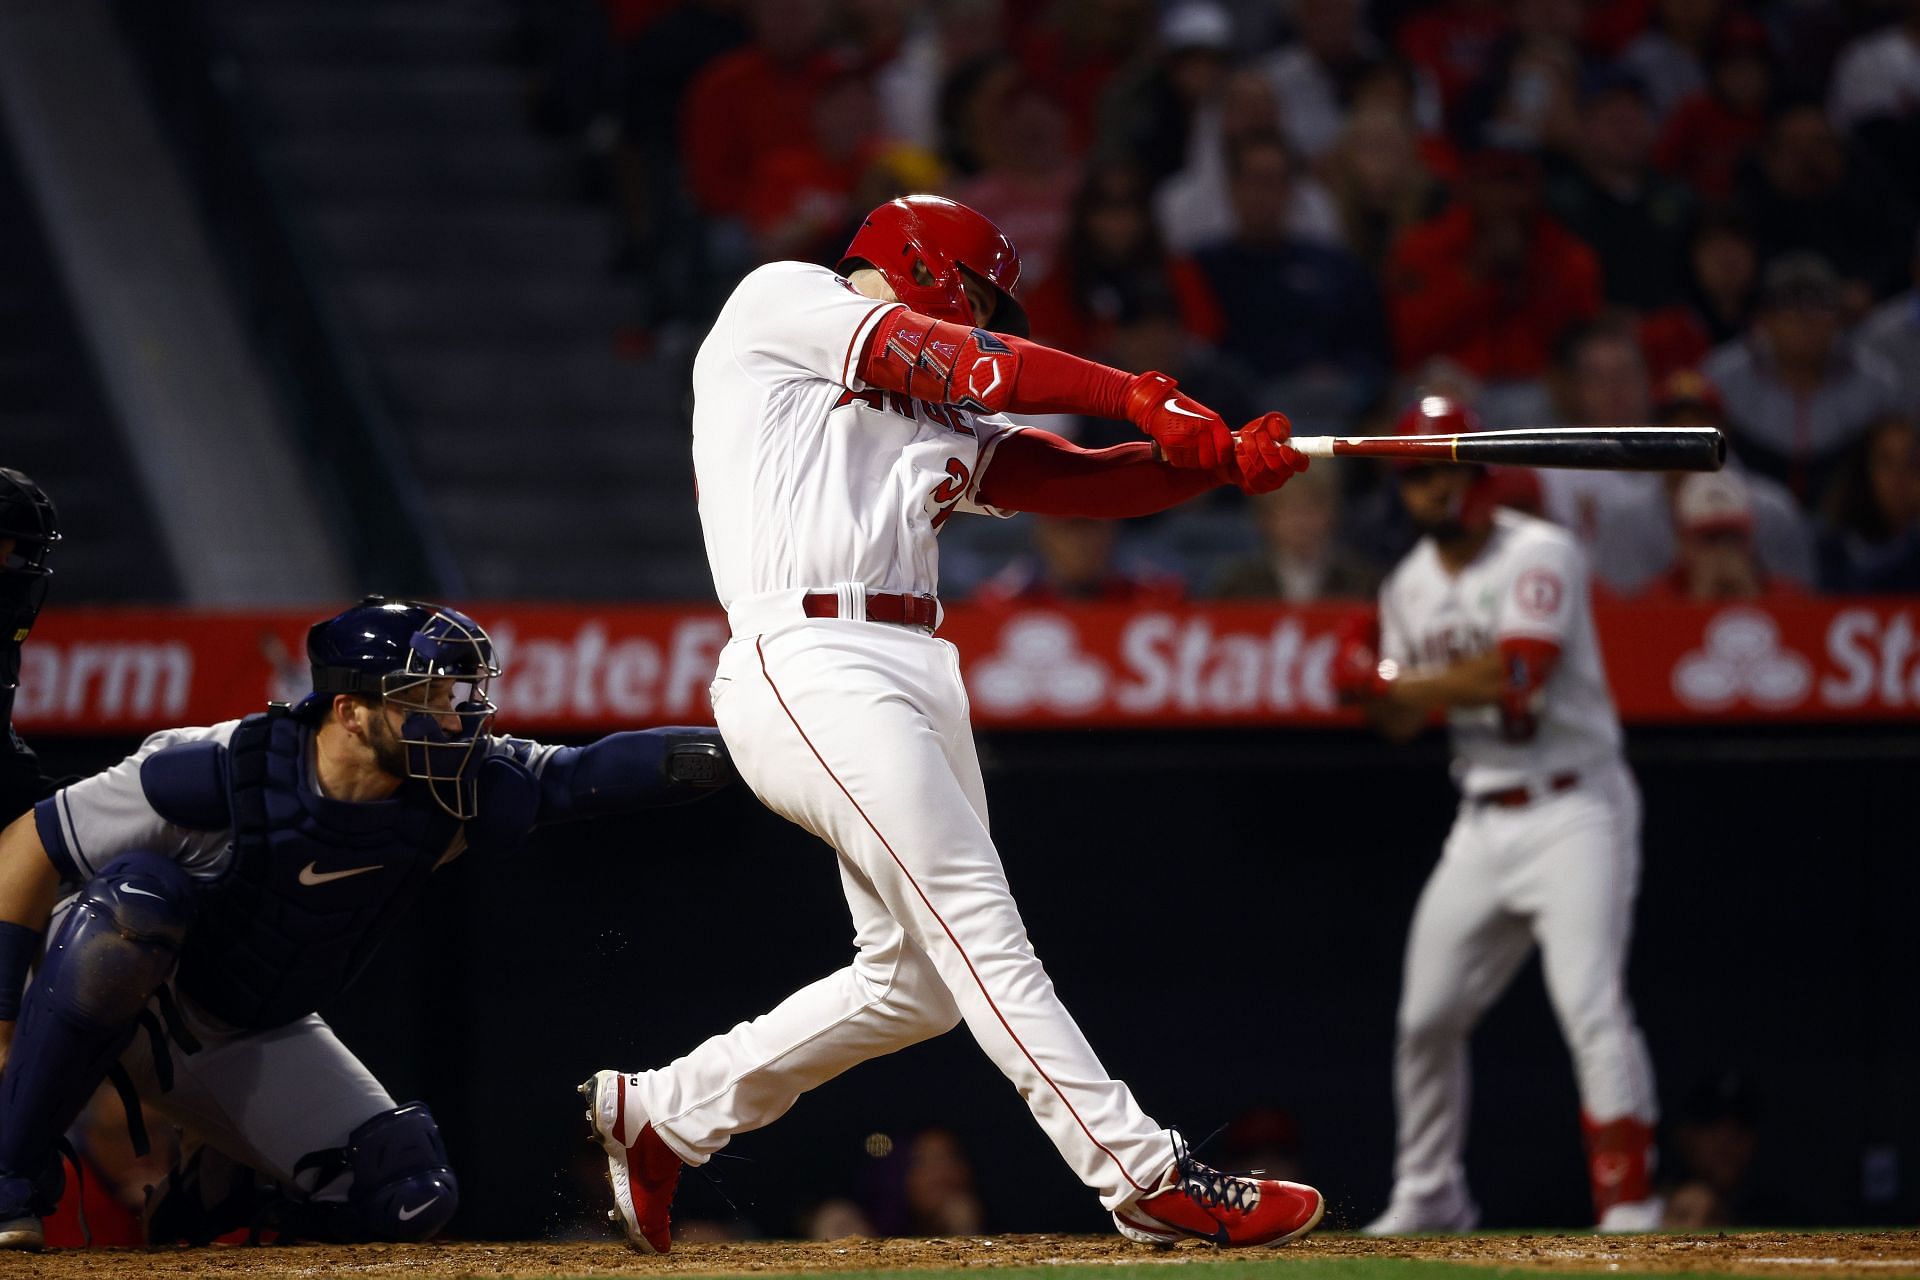 Los Angeles Angels first baseman Jared Walsh has notched 13 hits and 13 runs batted in his last nine games